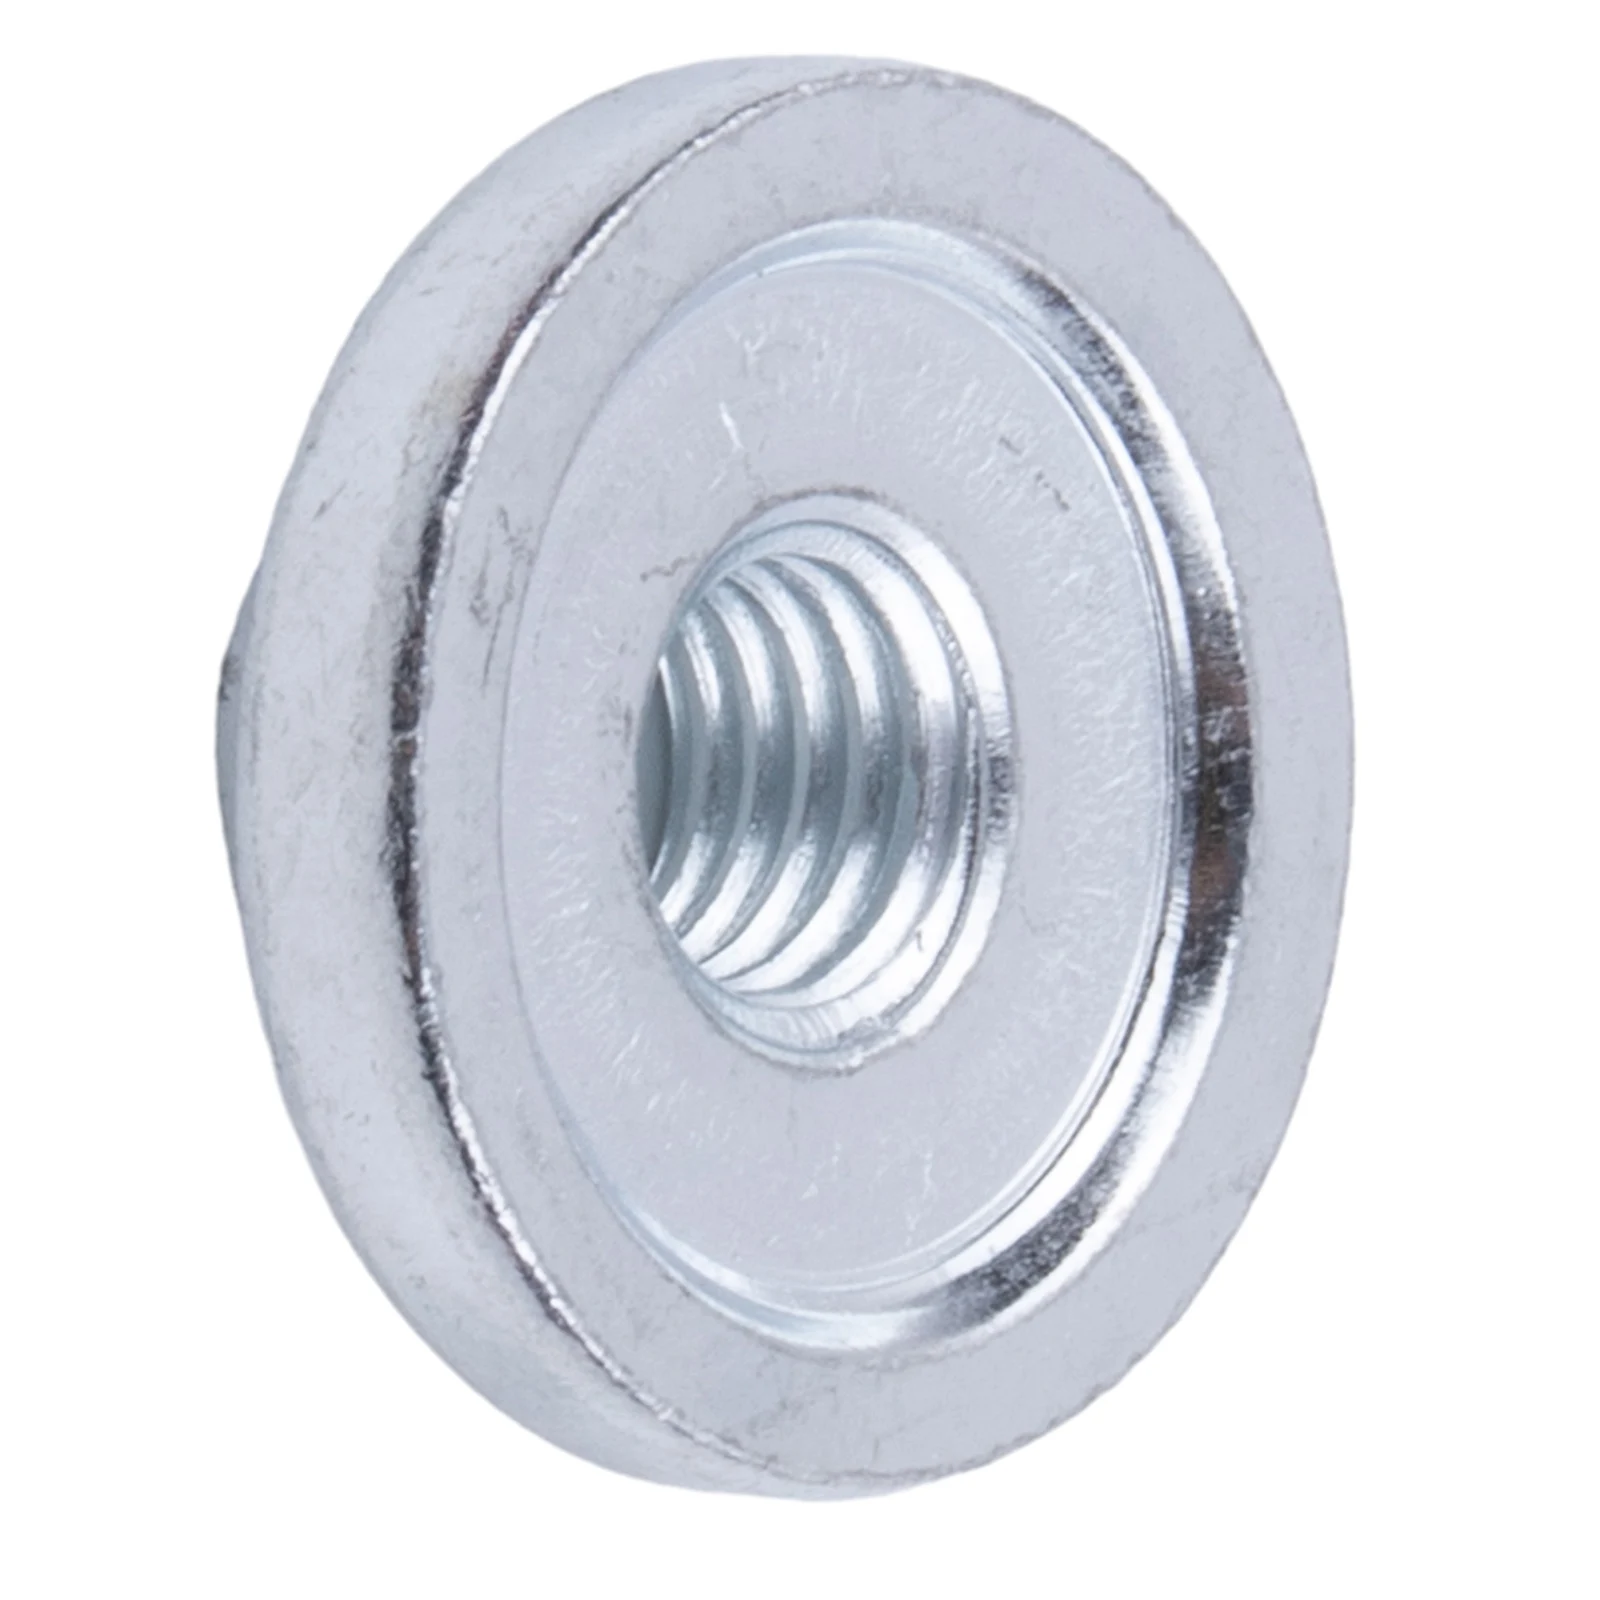 

1pc Hexagon Flange Nut For Angle Grinder 100 Type Disc Quick Change Locking Nut Quick Release Angle Grinder Accessories